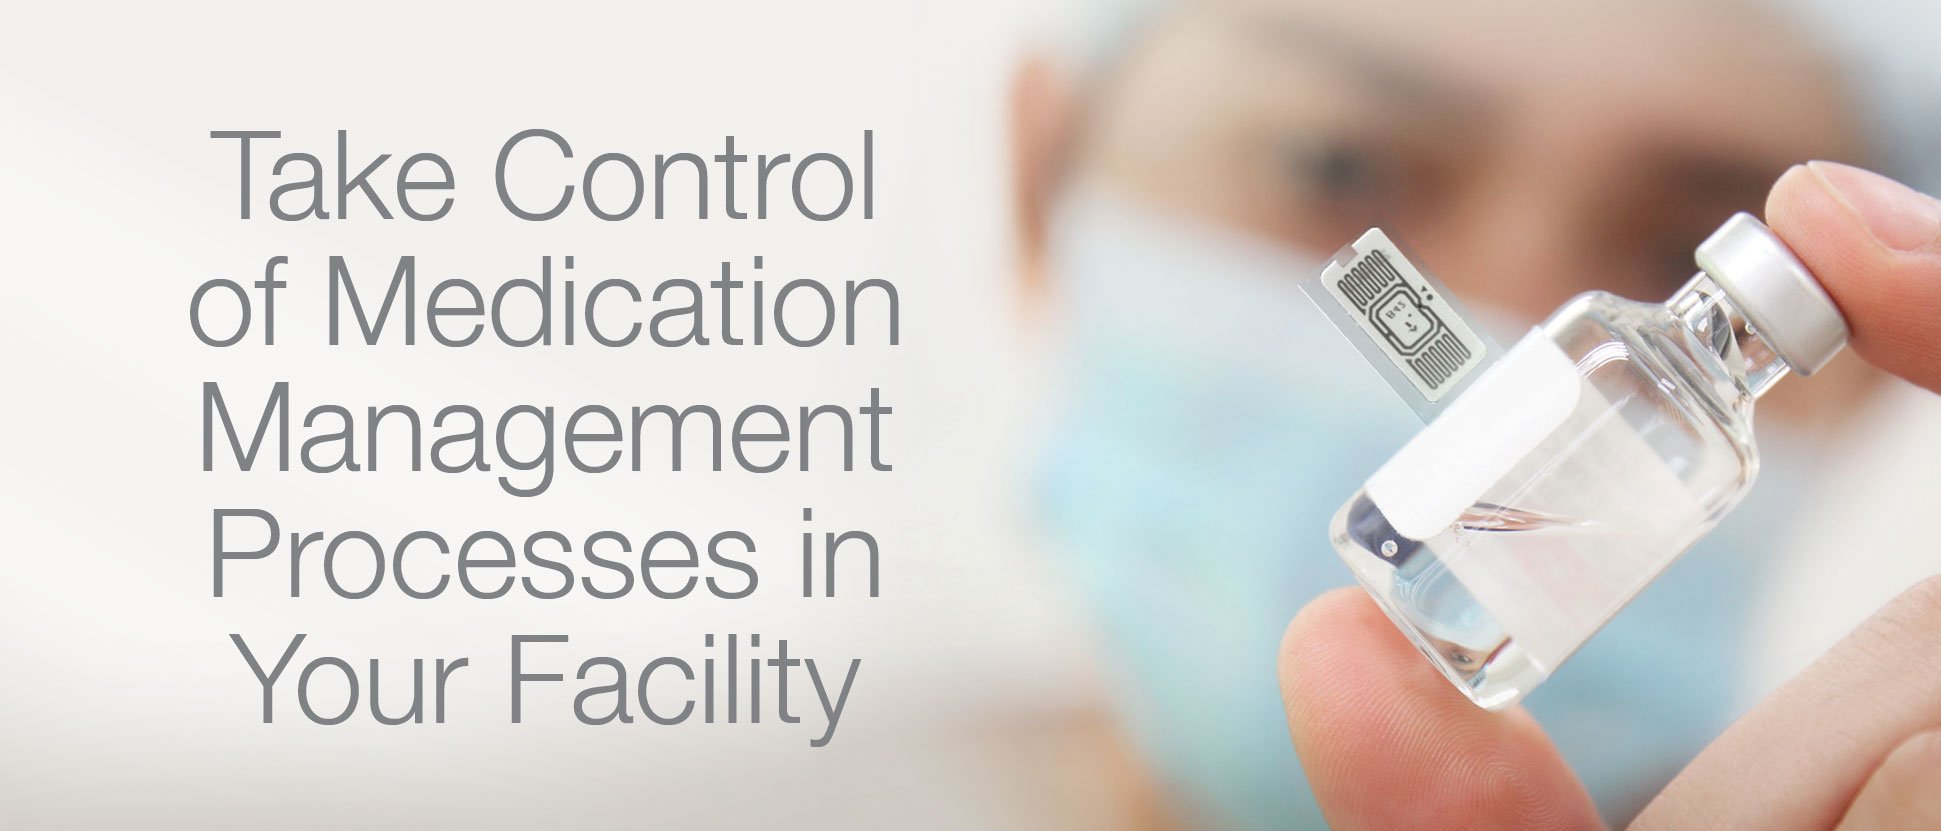 Take-control-of-medication-management-processes-in-your-facility.jpg